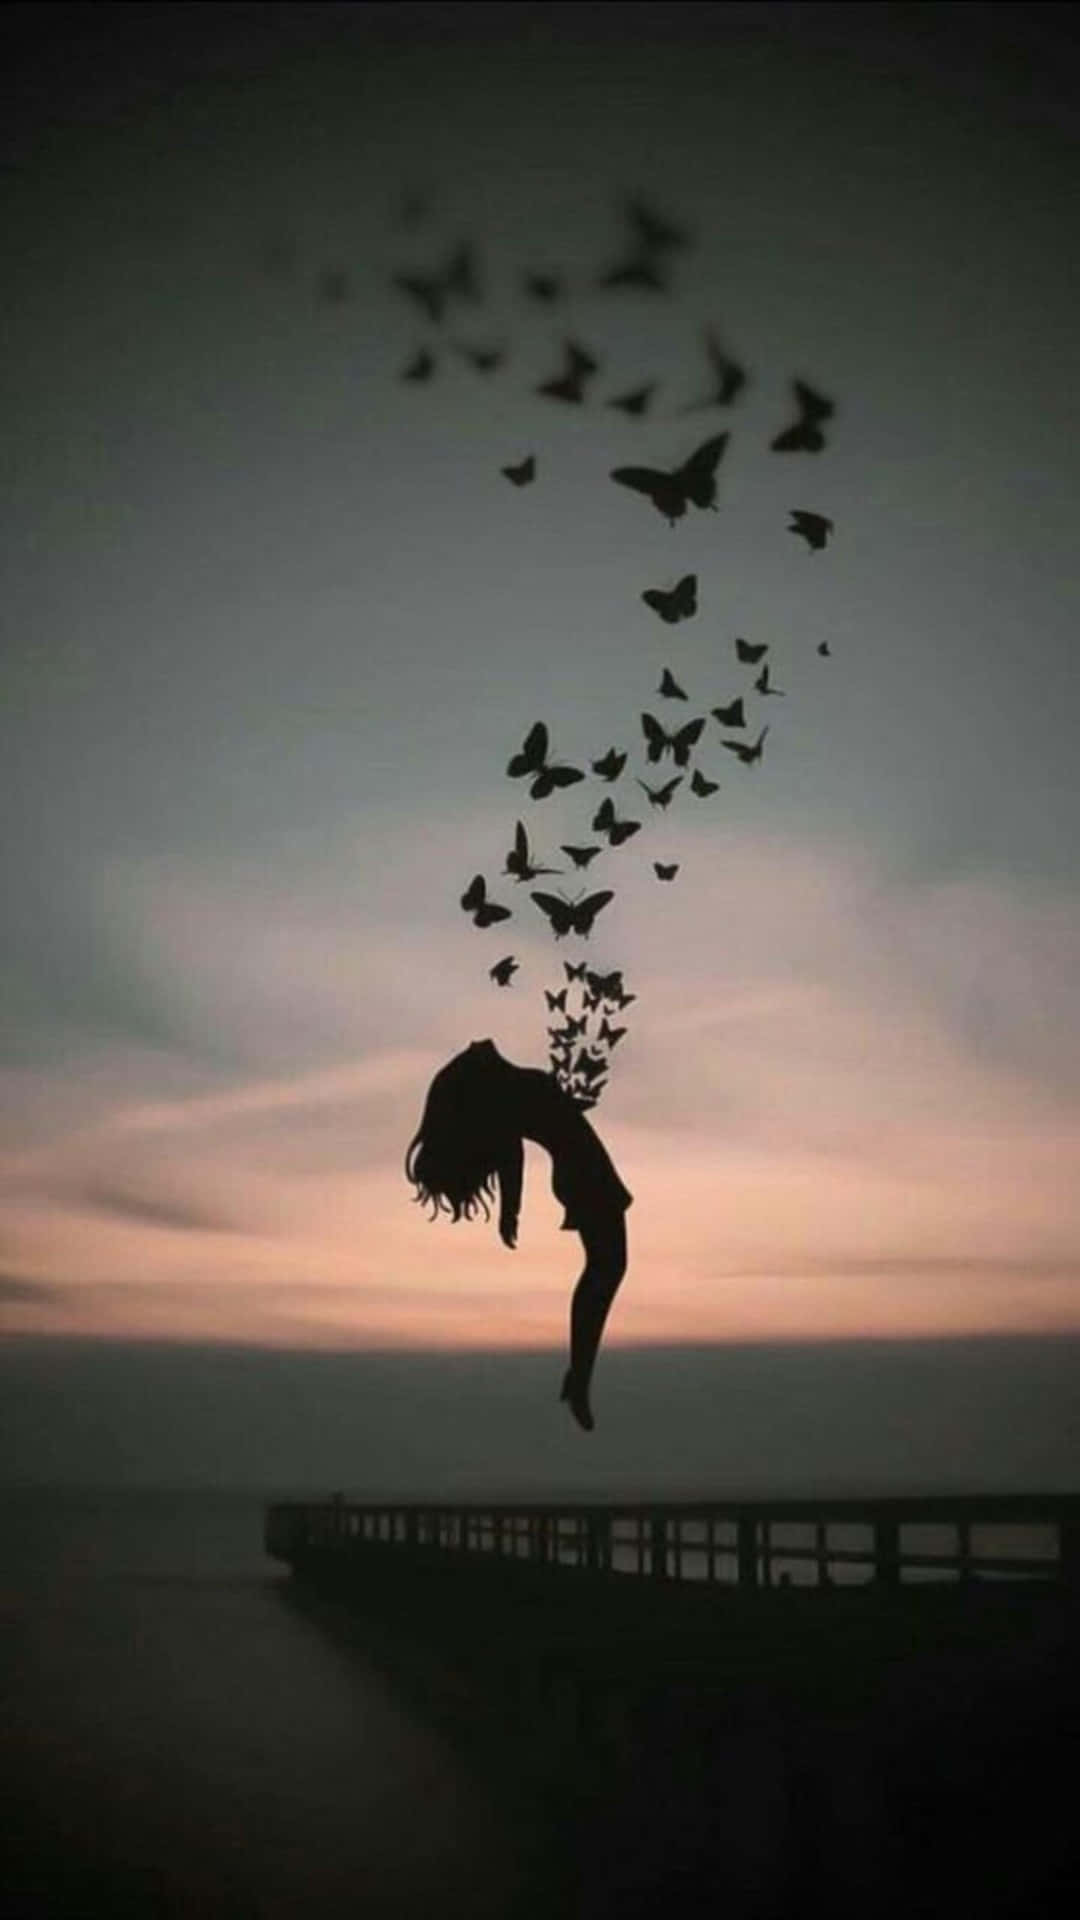 A Girl Is Flying In The Air With Birds Flying Around Her Background